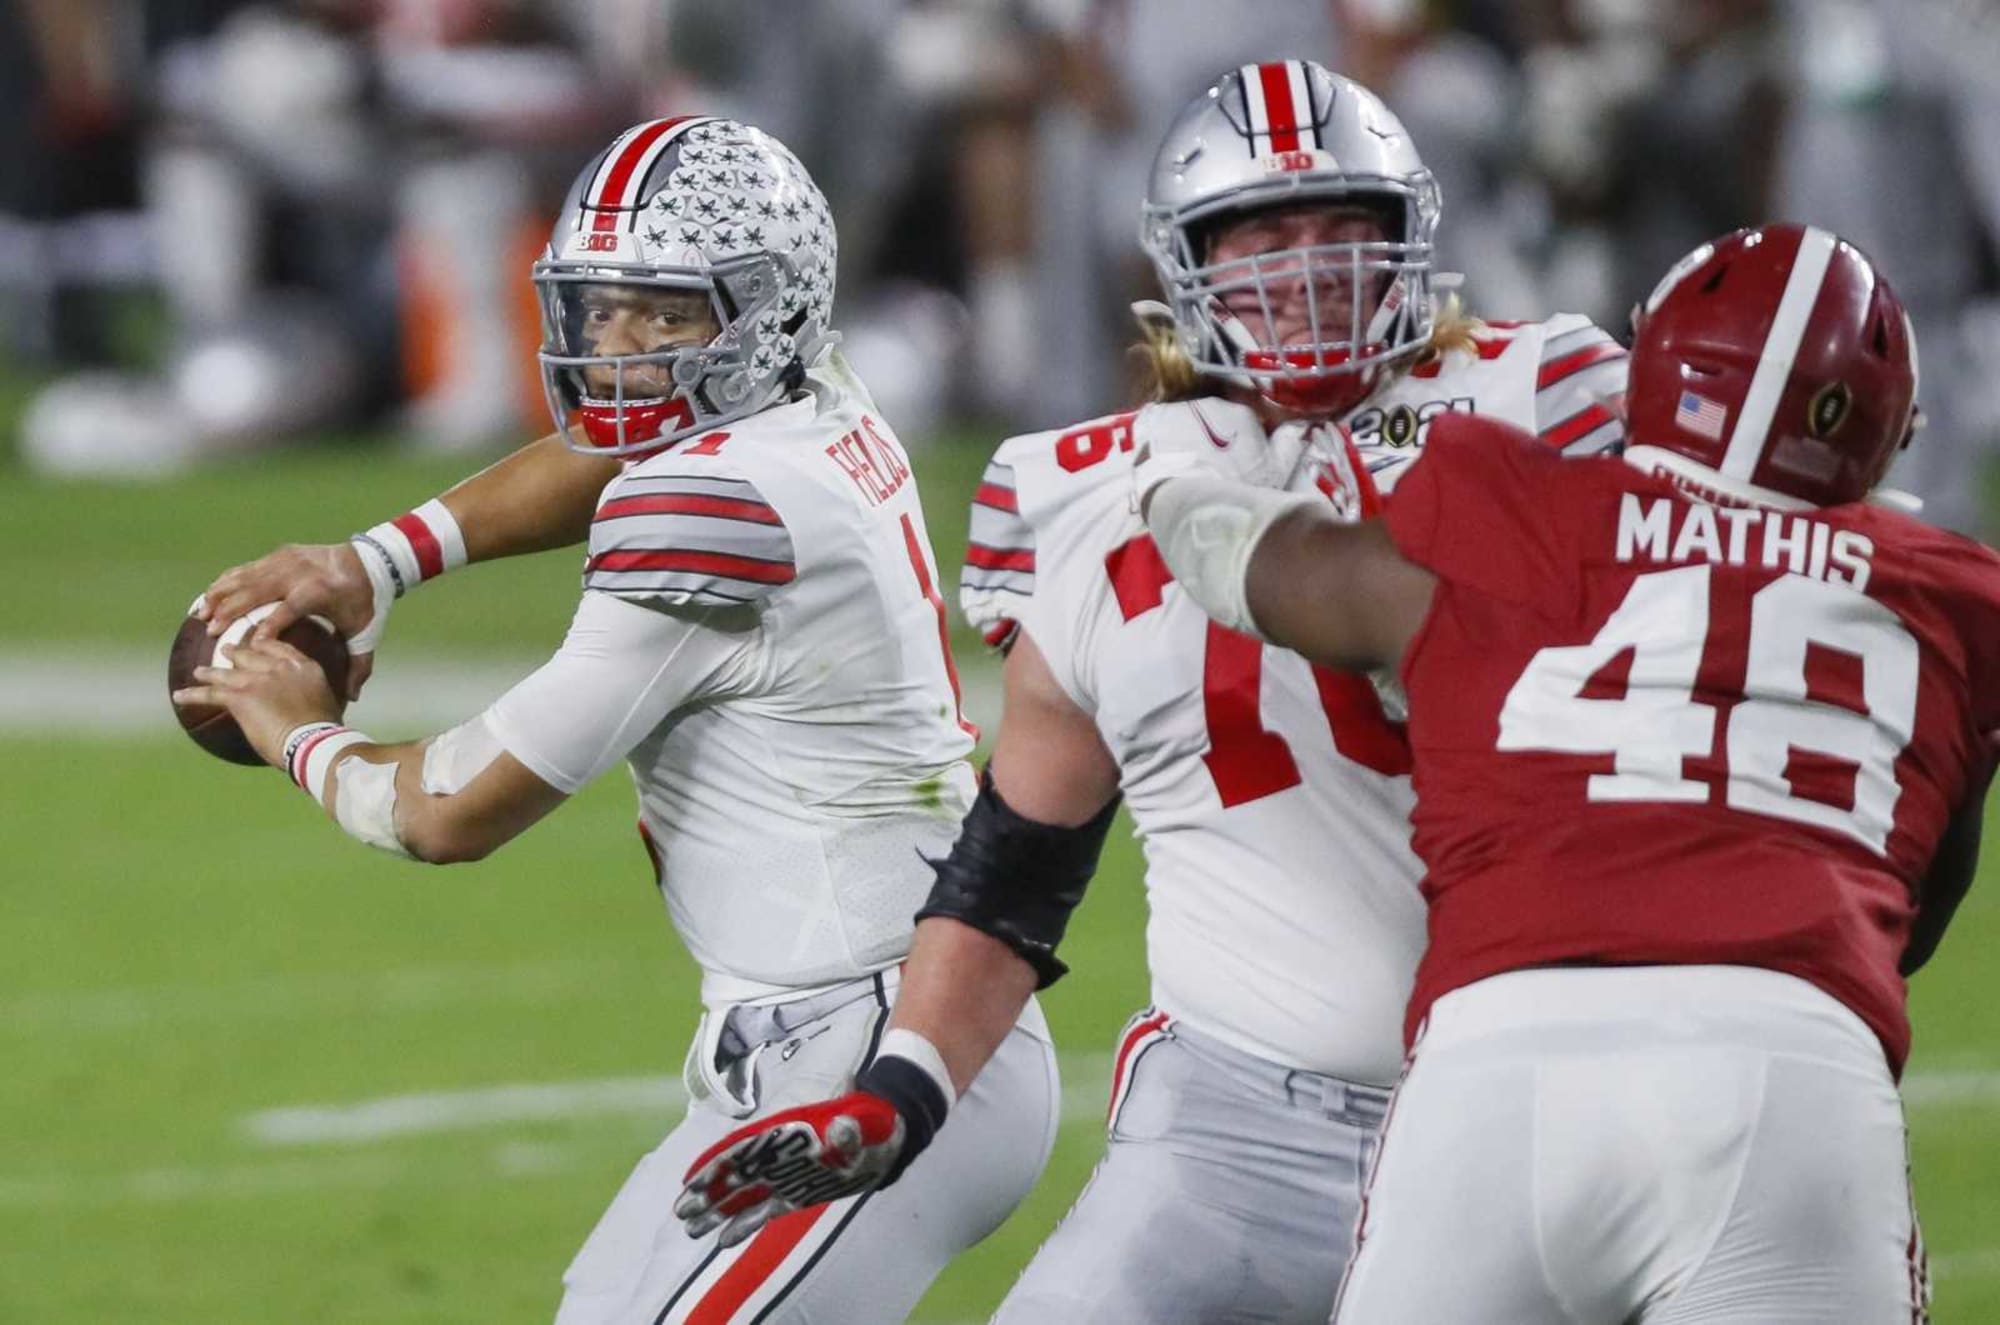 Ohio State football: Why Justin Fields would fit well with the Jets